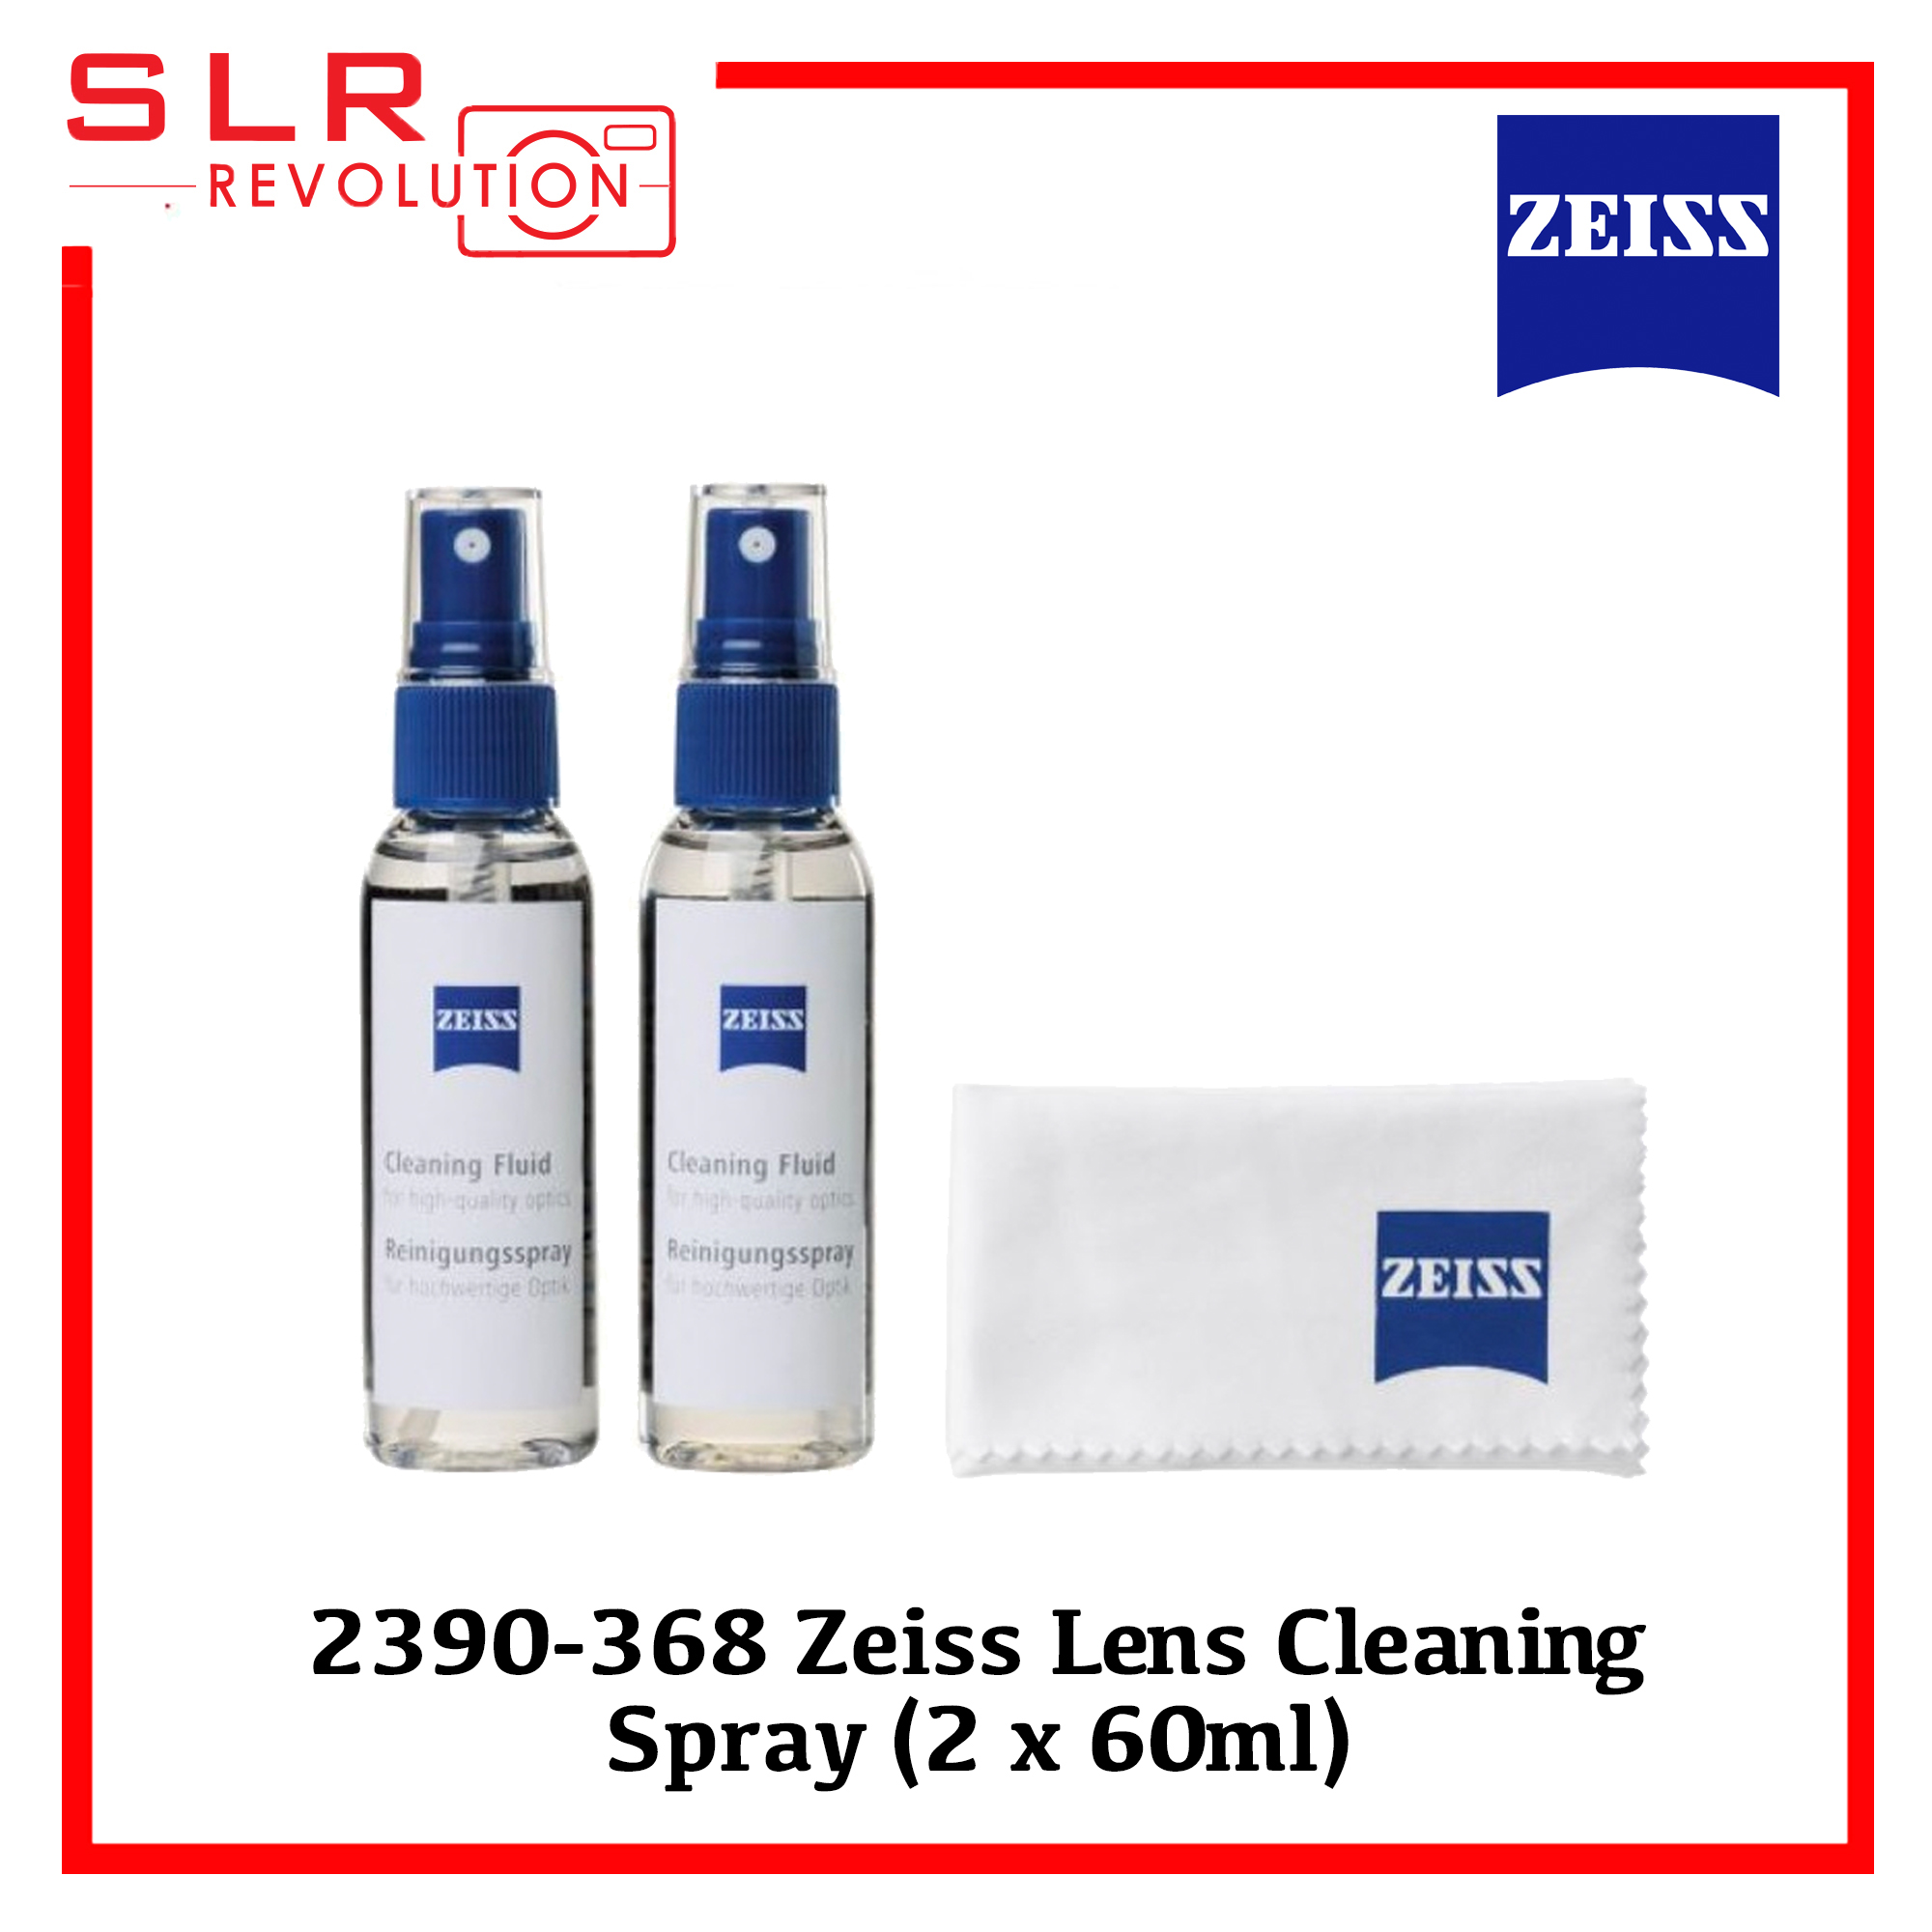 Anti Fog Spray 20ml Lens Cleaning Spray for Swimming Goggles